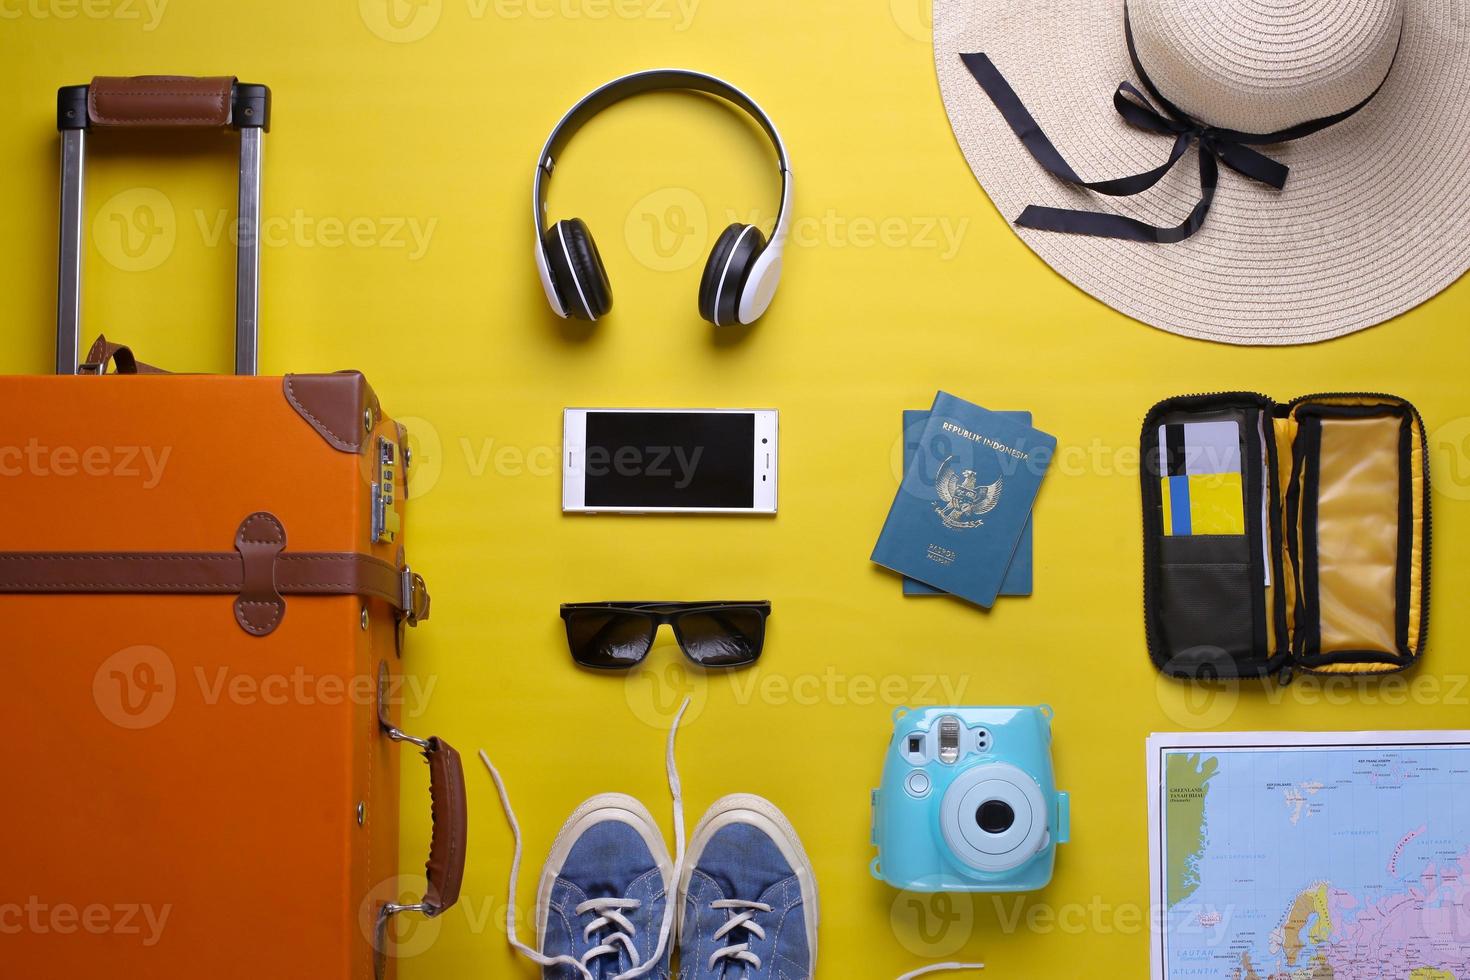 Flat lay orange suitcase with traveler accessories on yellow background. travel concept photo